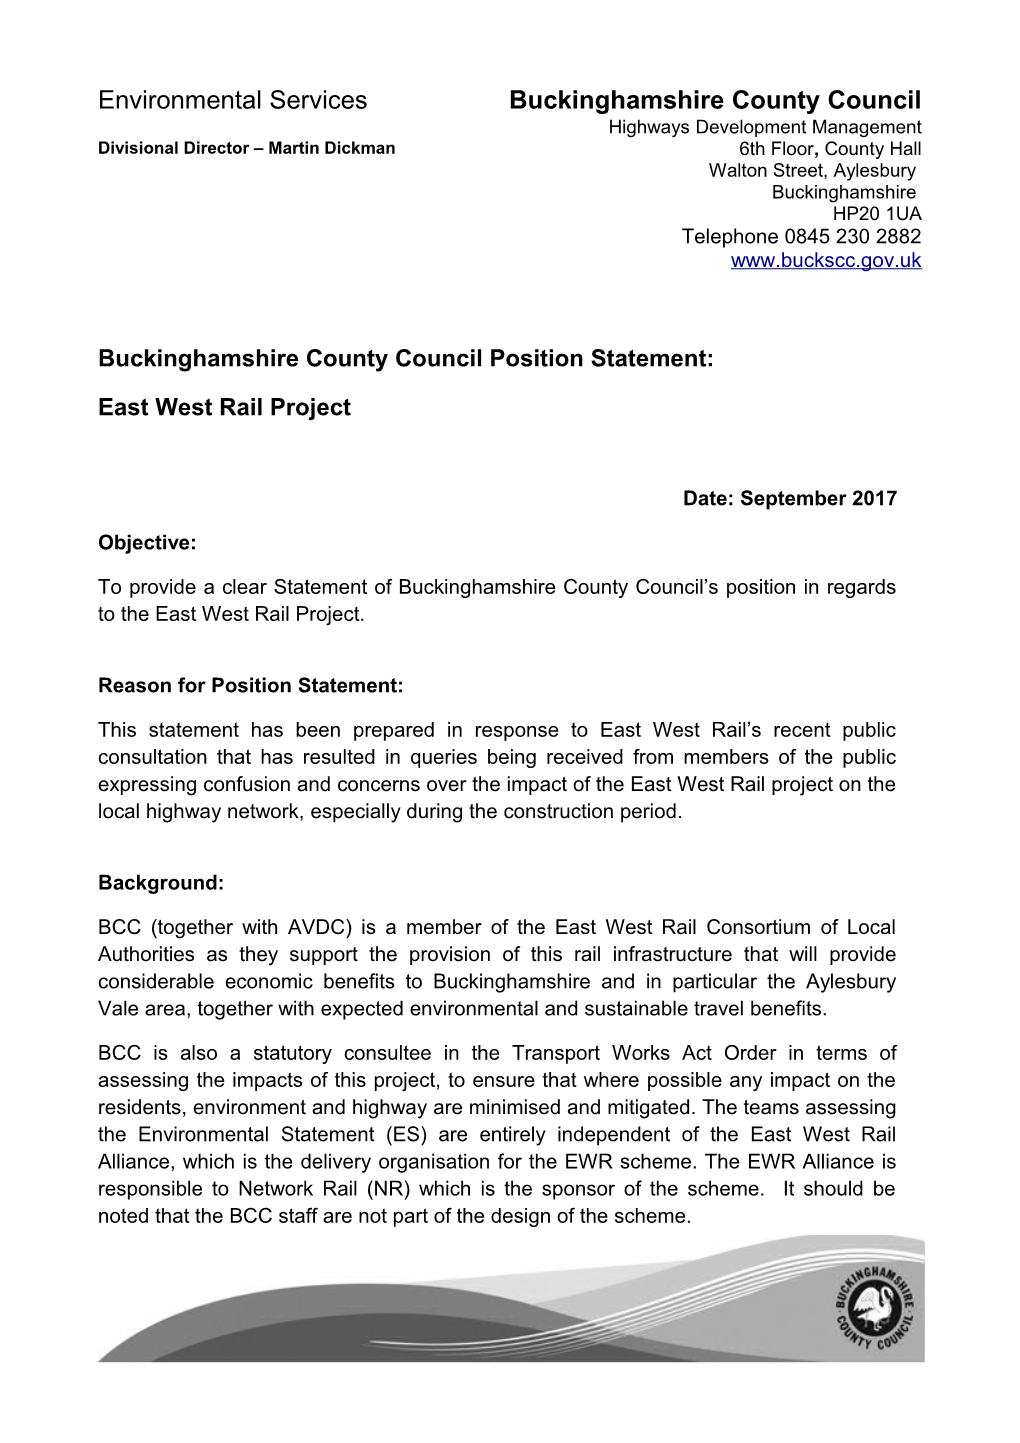 Buckinghamshire County Council Position Statement